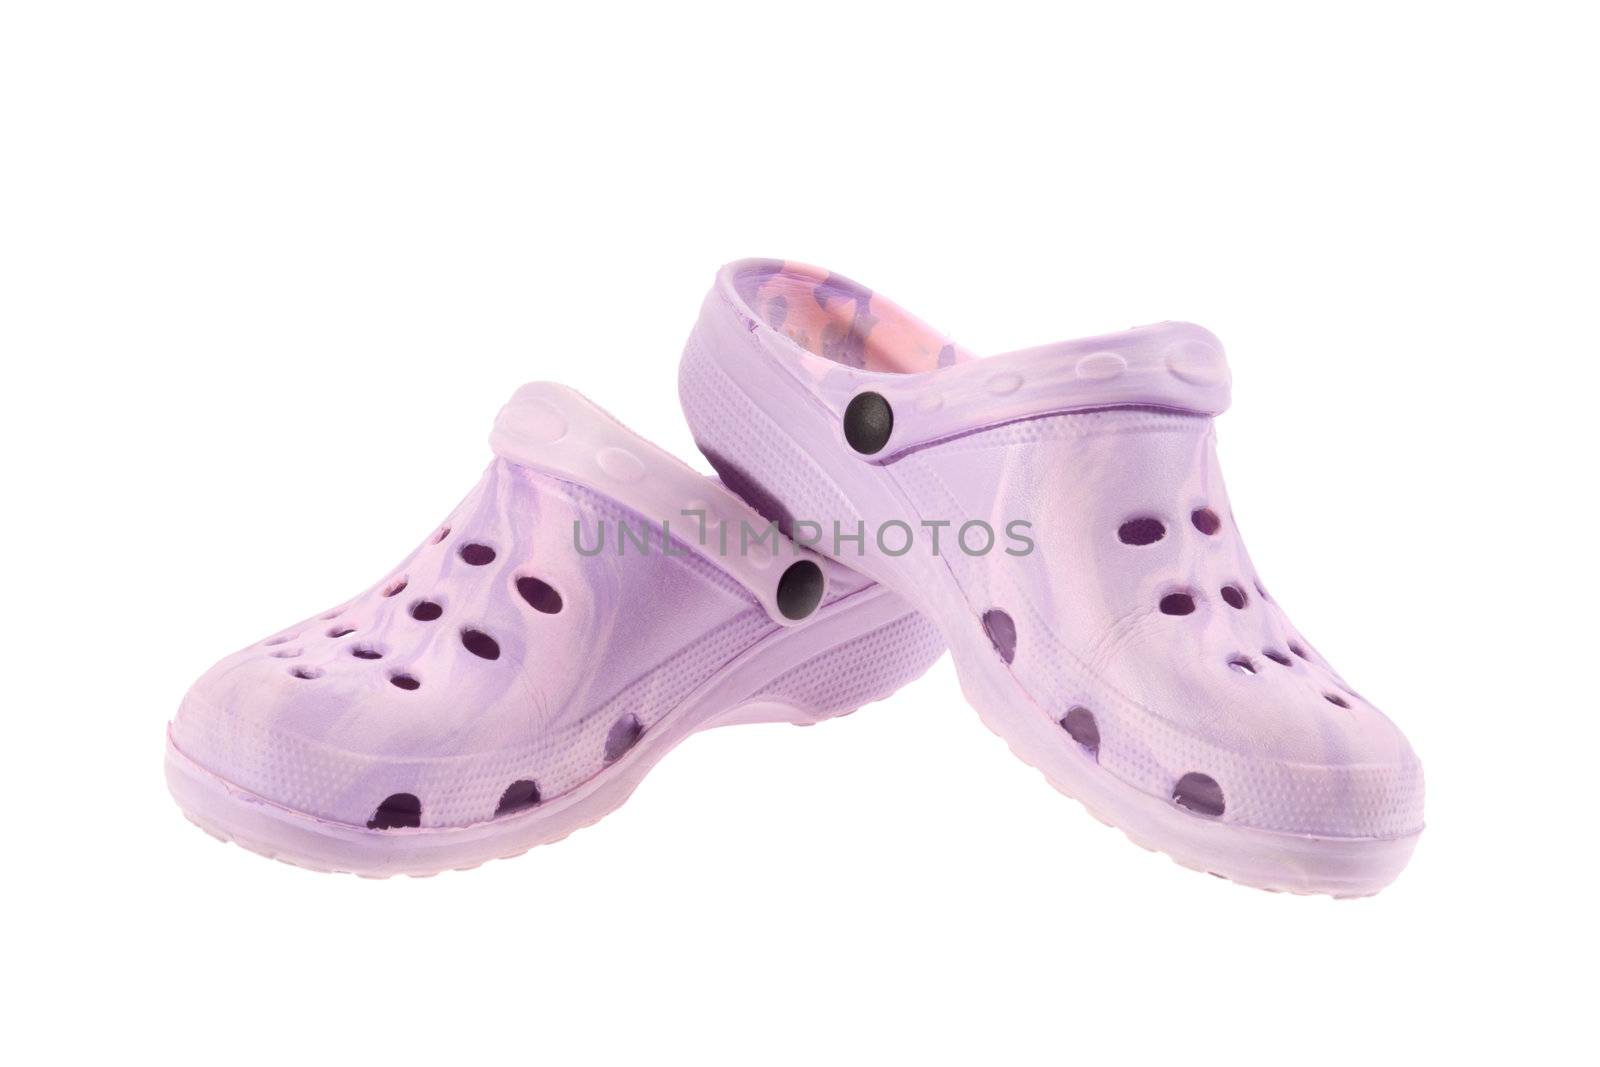 Rubber sandals, photo on the white background 